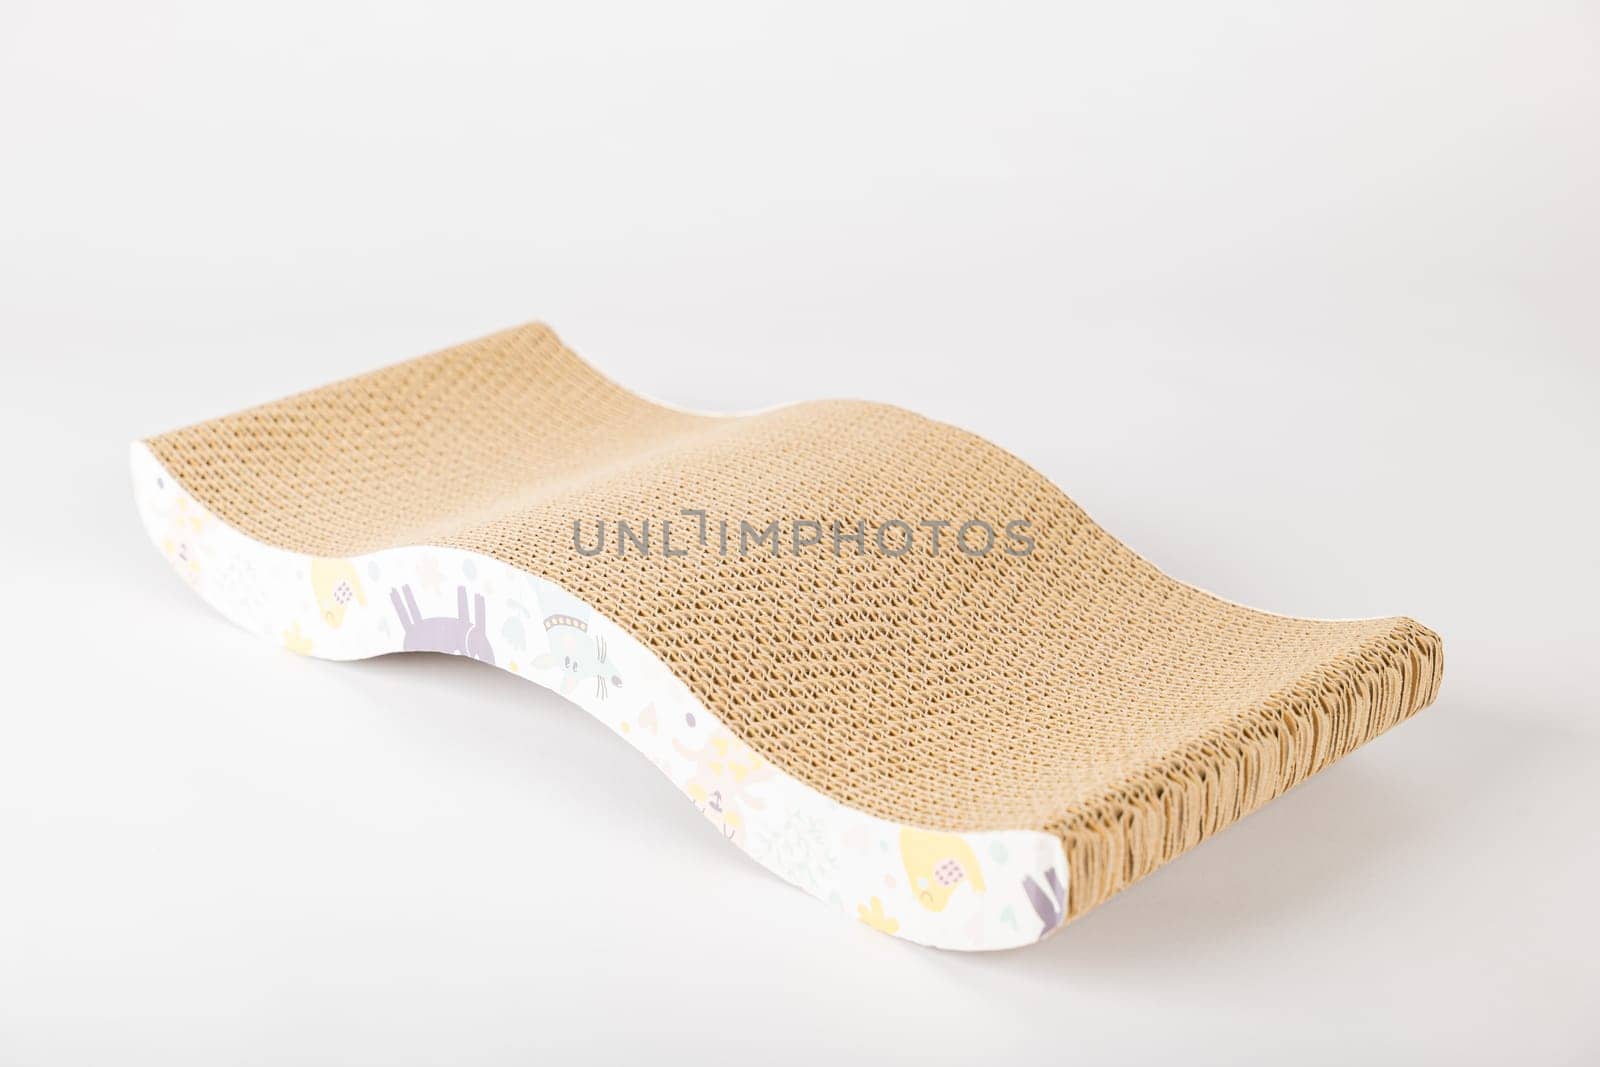 On white backdrop modern abstract cat scratching post showcases its dual purpose as comfy lounge bed made from corrugated cardboard. The cat alertness and playful paw make it a staple for feline care.